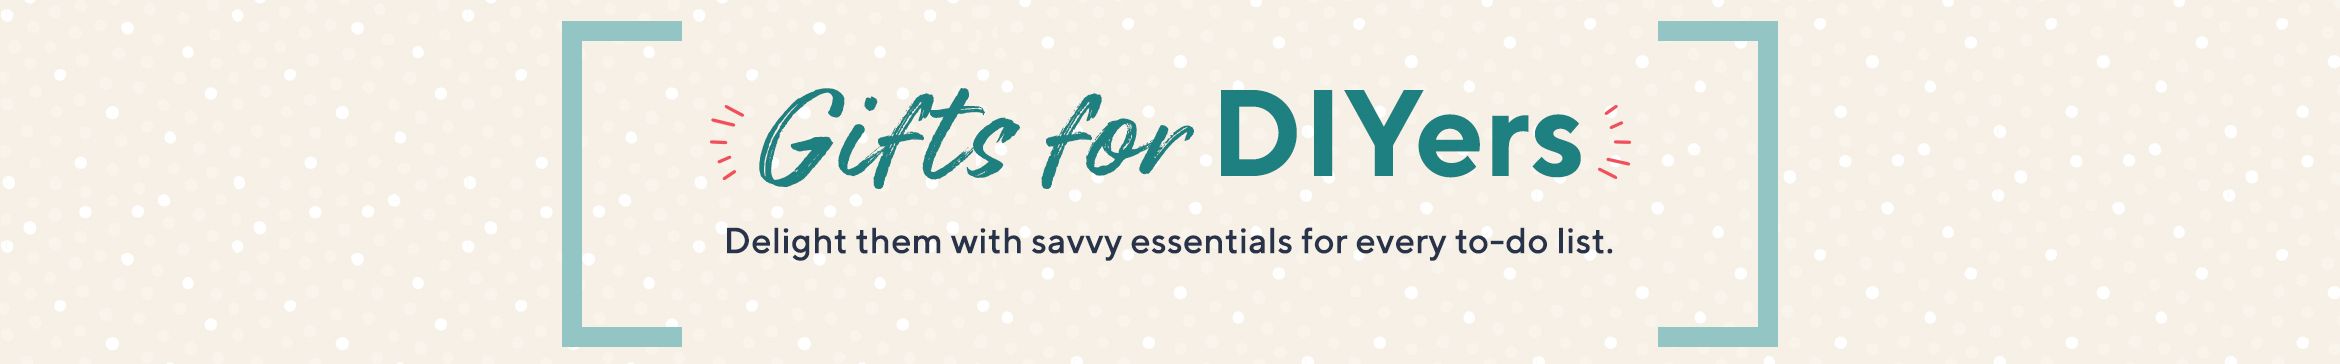 Gifts for DIYers.  Delight them with savvy essentials for every to-do list.